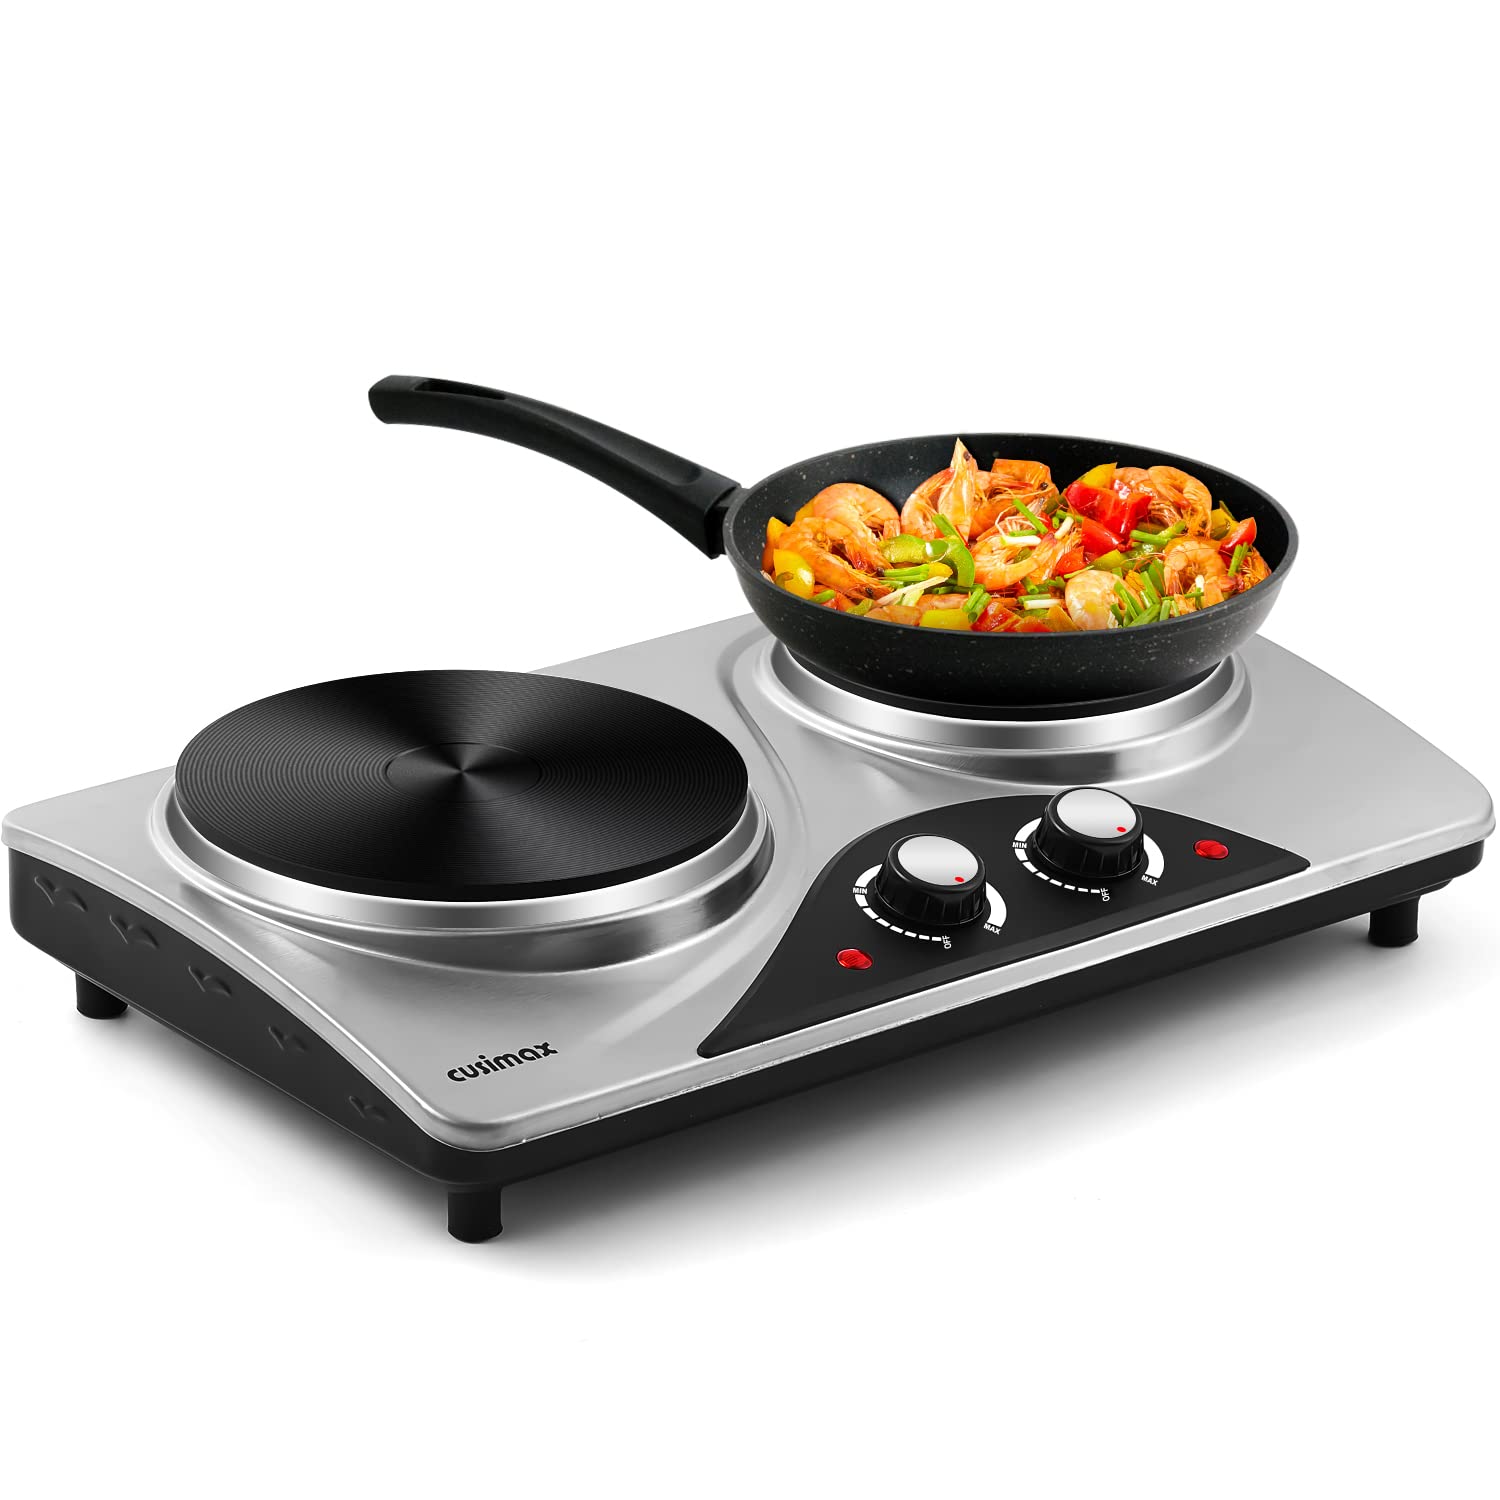 Cusimax 1800W Electric Double Hot Plate, Silver Infrared Stove